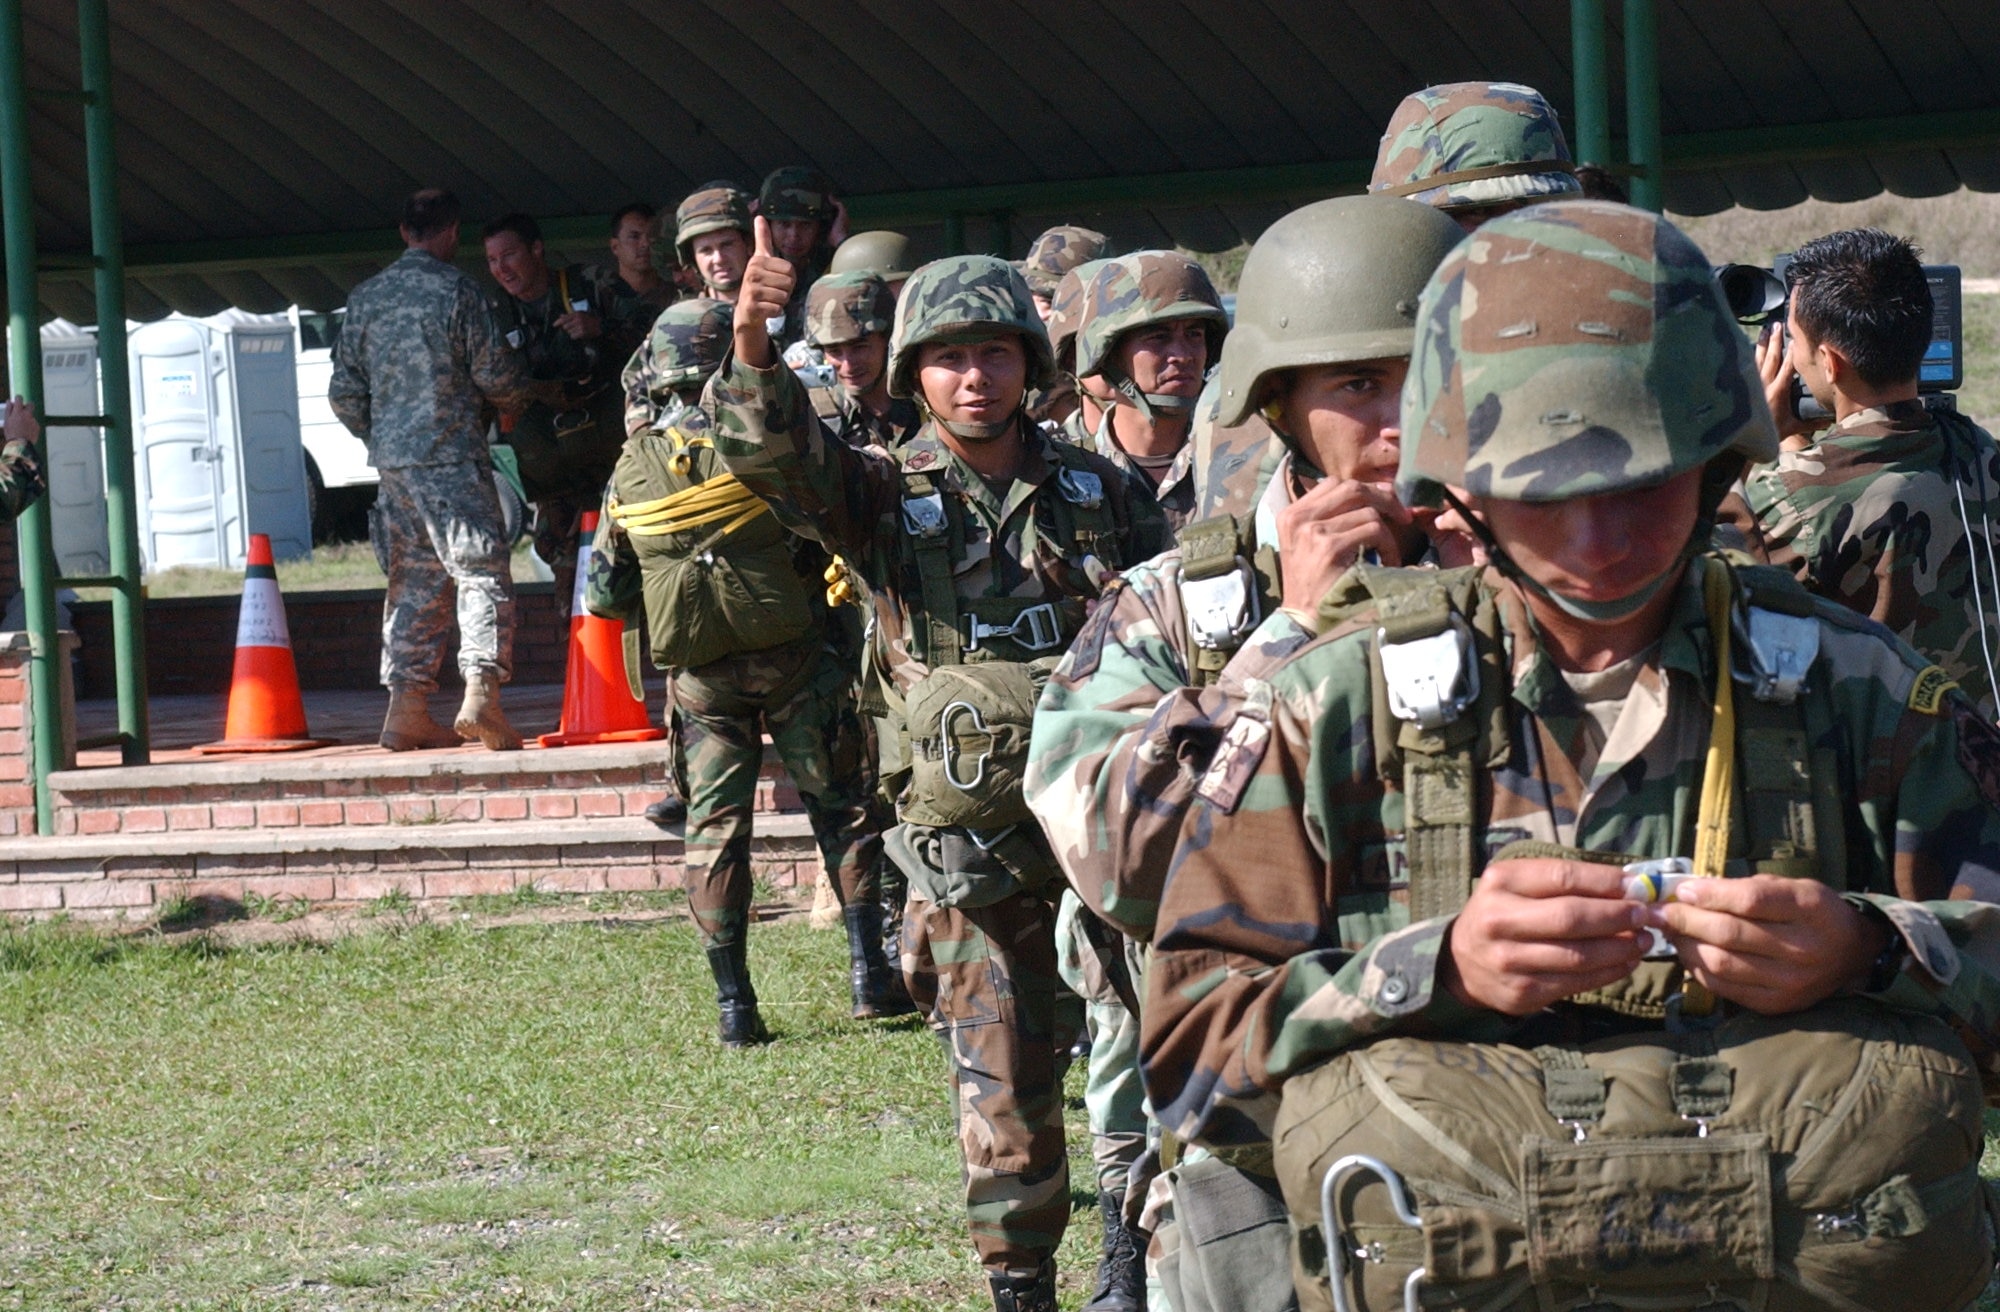 TAMARA DROP ZONE, Honduras – A Central American paratrooper gives a “thumbs up” as he waits in line prior to boarding a CH-47 Chinook helicopter for an airborne operation here. Joint Task Force-Bravo hosted Iguana Voladora, an annual paratrooper exercise, April 29 through May 4 and hosted more than 50 paratroopers from Central and South America for the week.   (U.S. Air Force photo/Tech. Sgt. Sonny Cohrs)